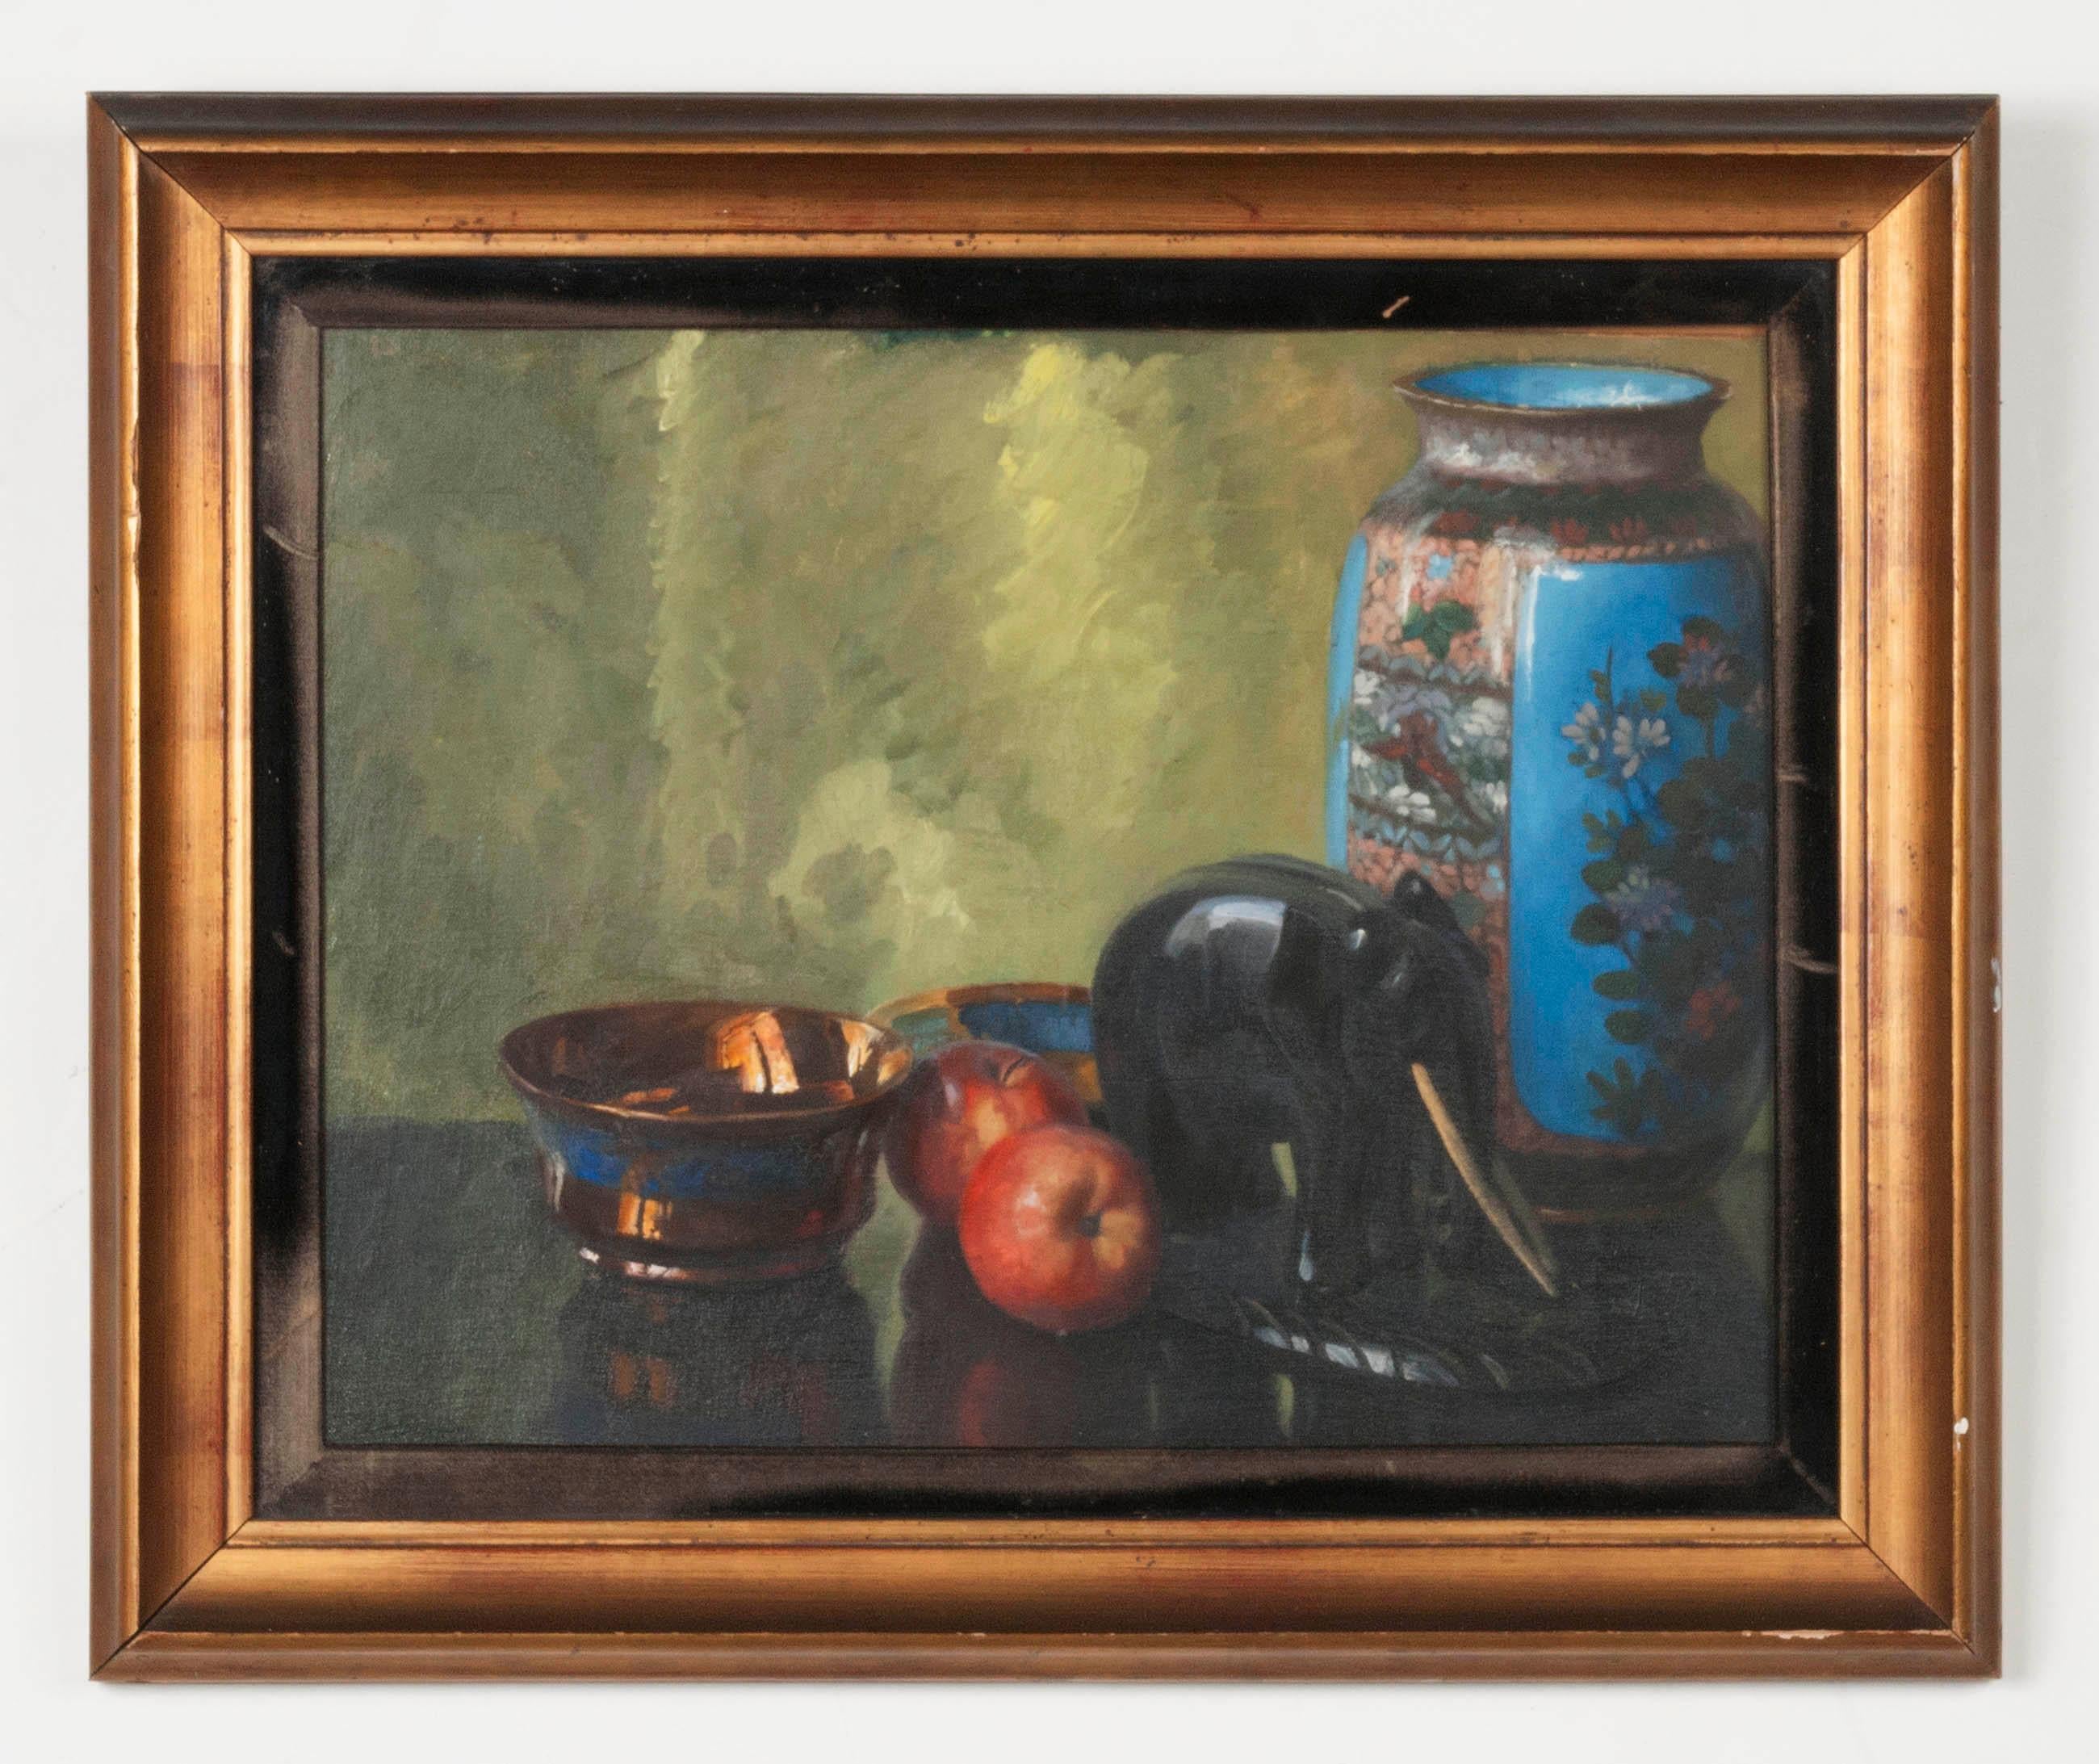 Atmospheric paintings, oil on board, made by Eddy (Edmond) Passauro.
The works were made clear by a skilled painter, for example, pay attention to the reflection of the vases and the way in which the silver bowl was painted. The composition has